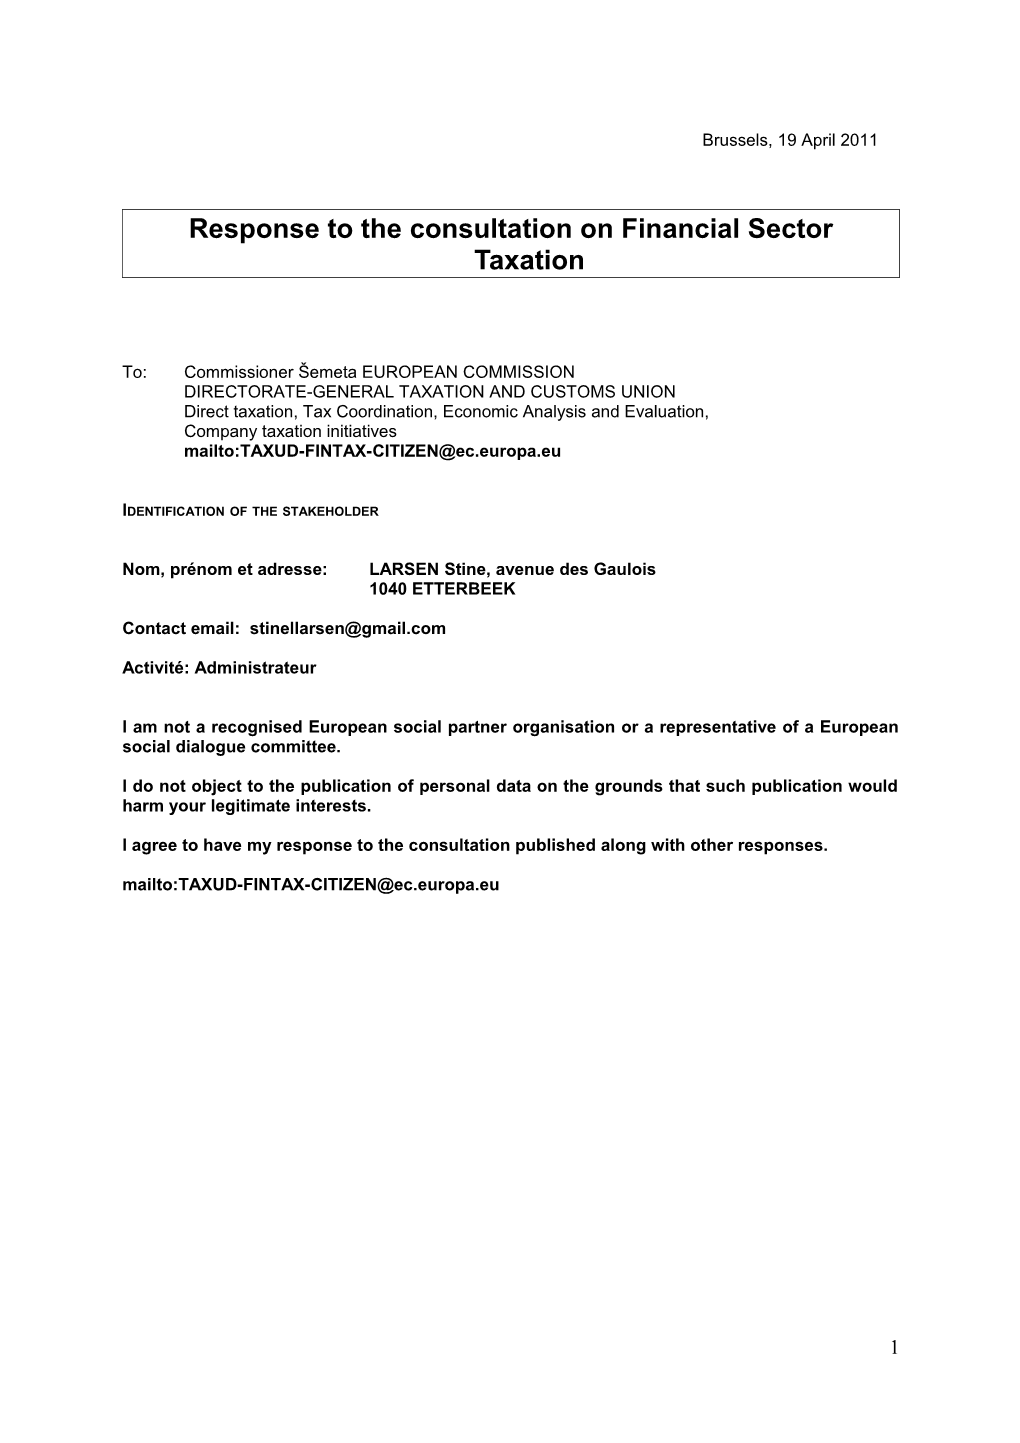 Response to the Consultation on Financial Sector Taxation